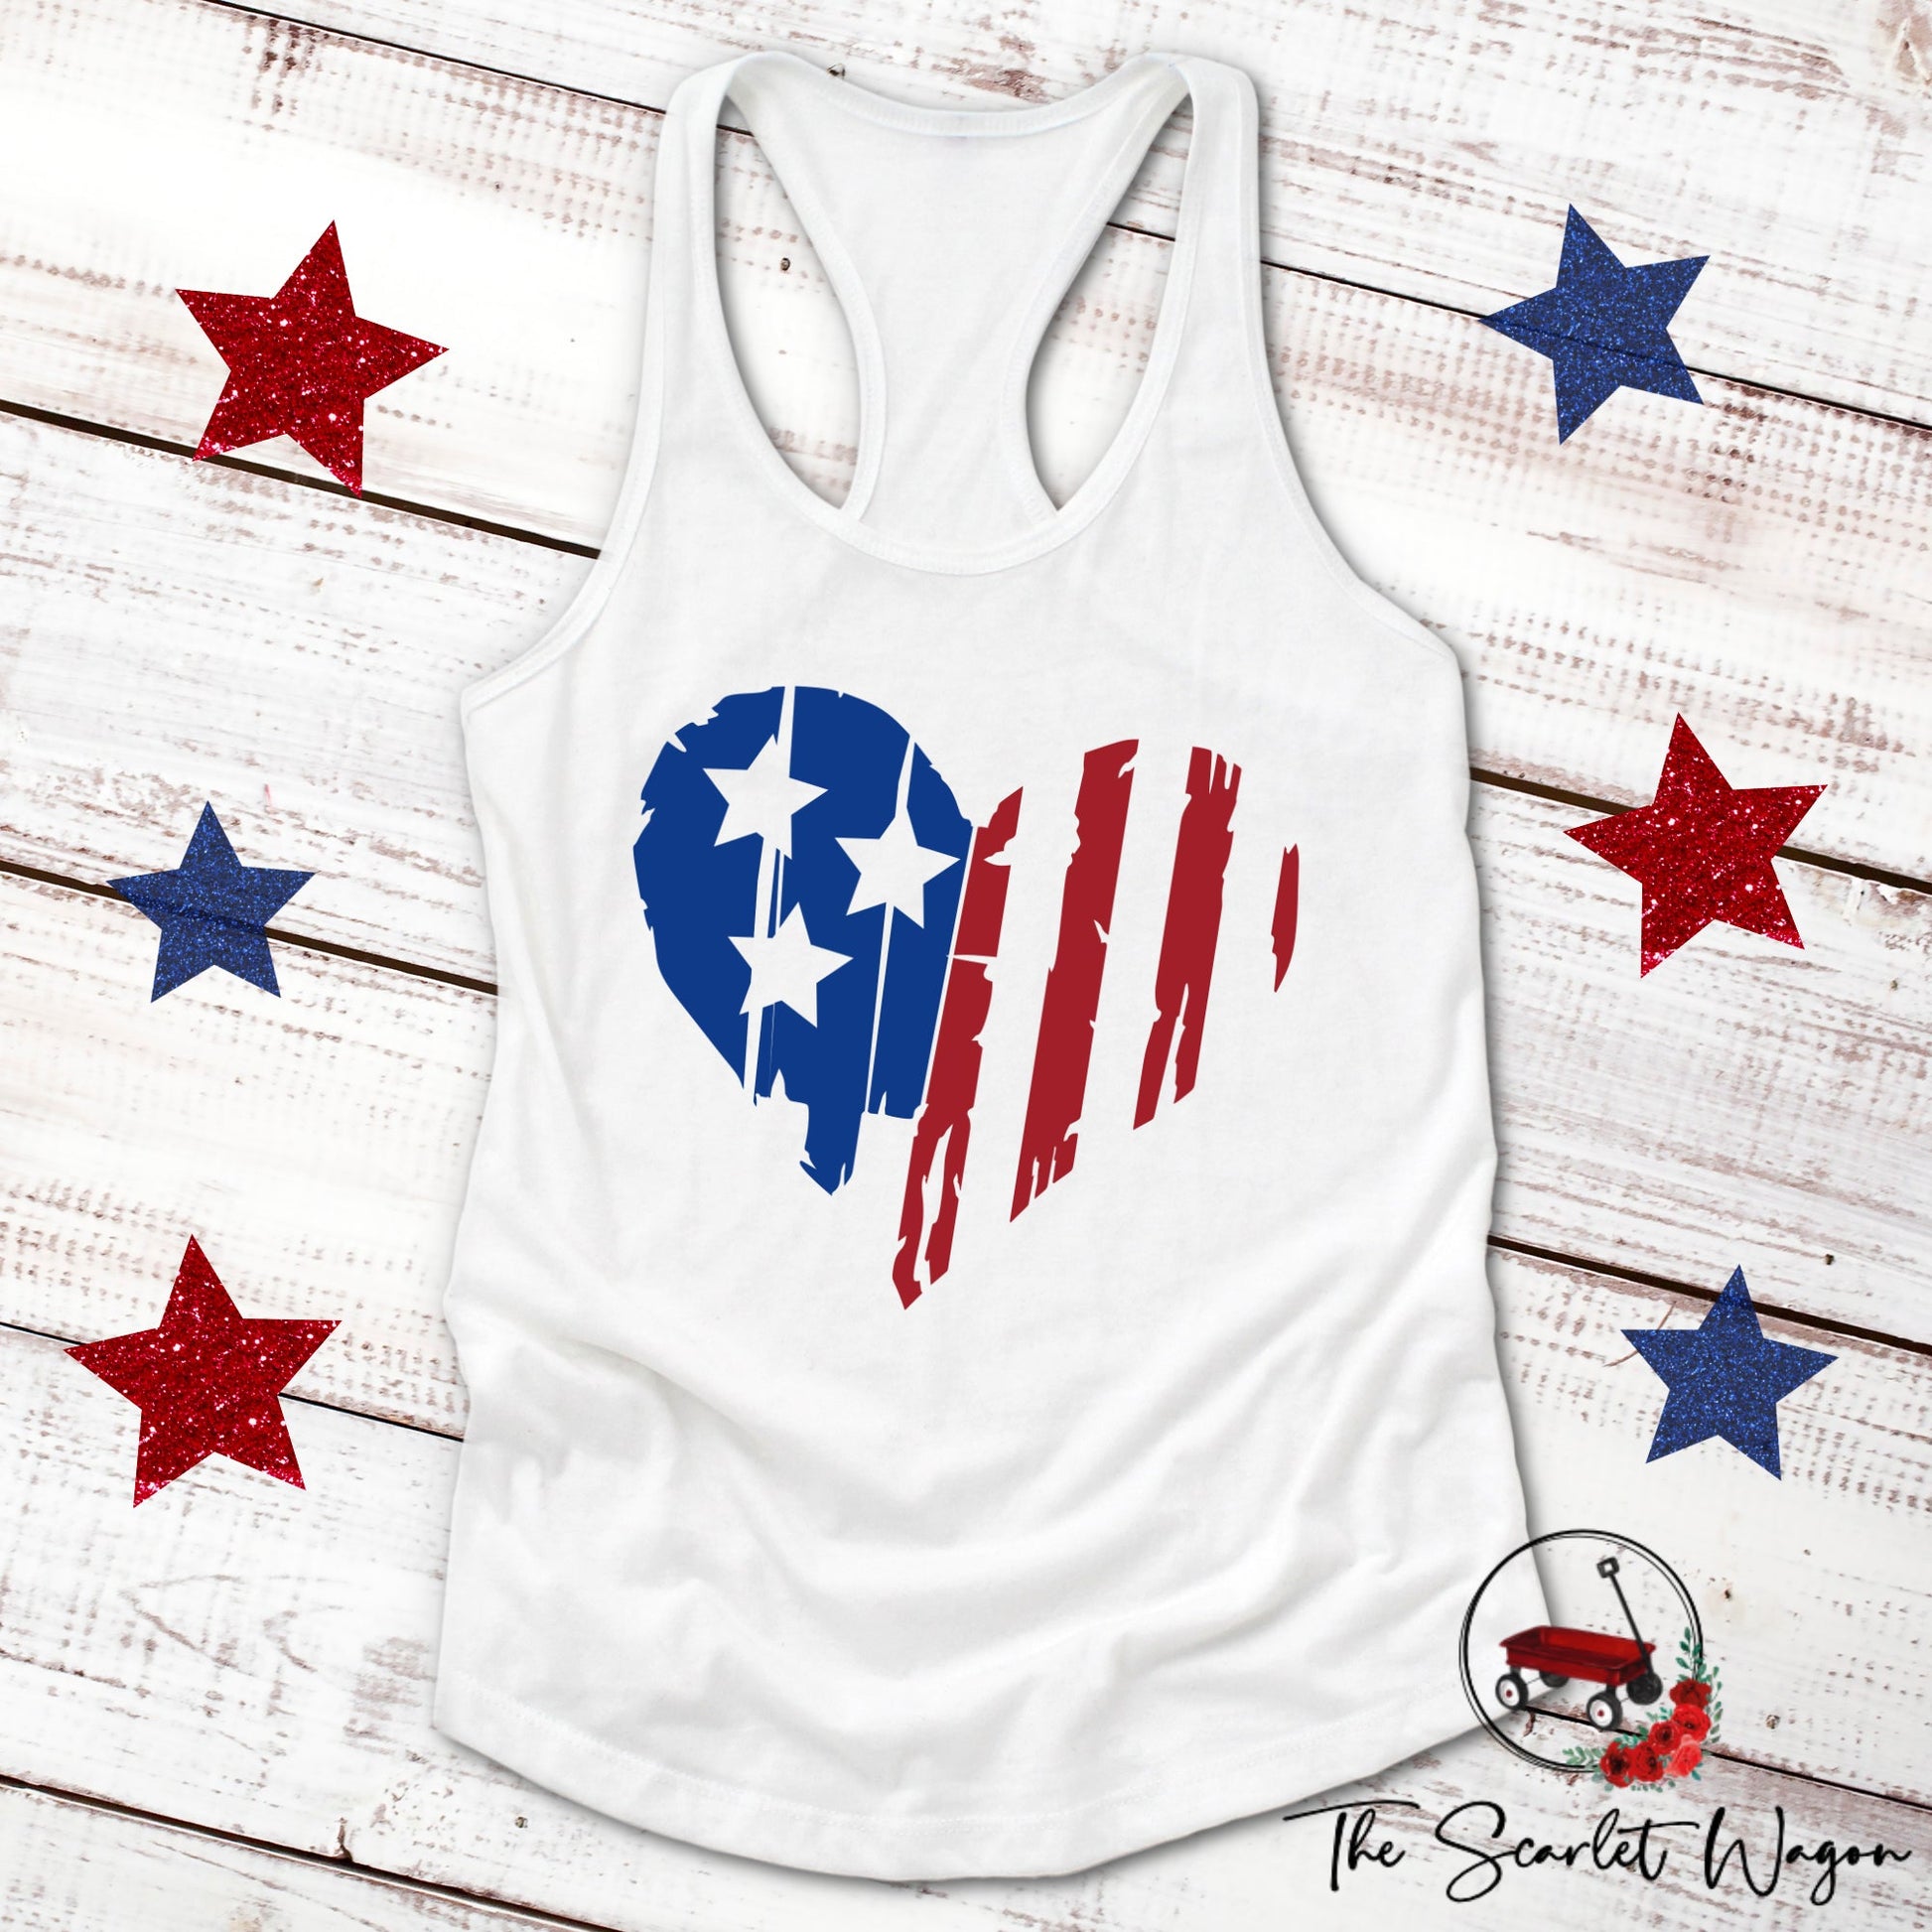 Distressed Heart-Shaped Flag Women's Racerback Tank Patriotic Shirt The Scarlet Wagon Boutique White Small 